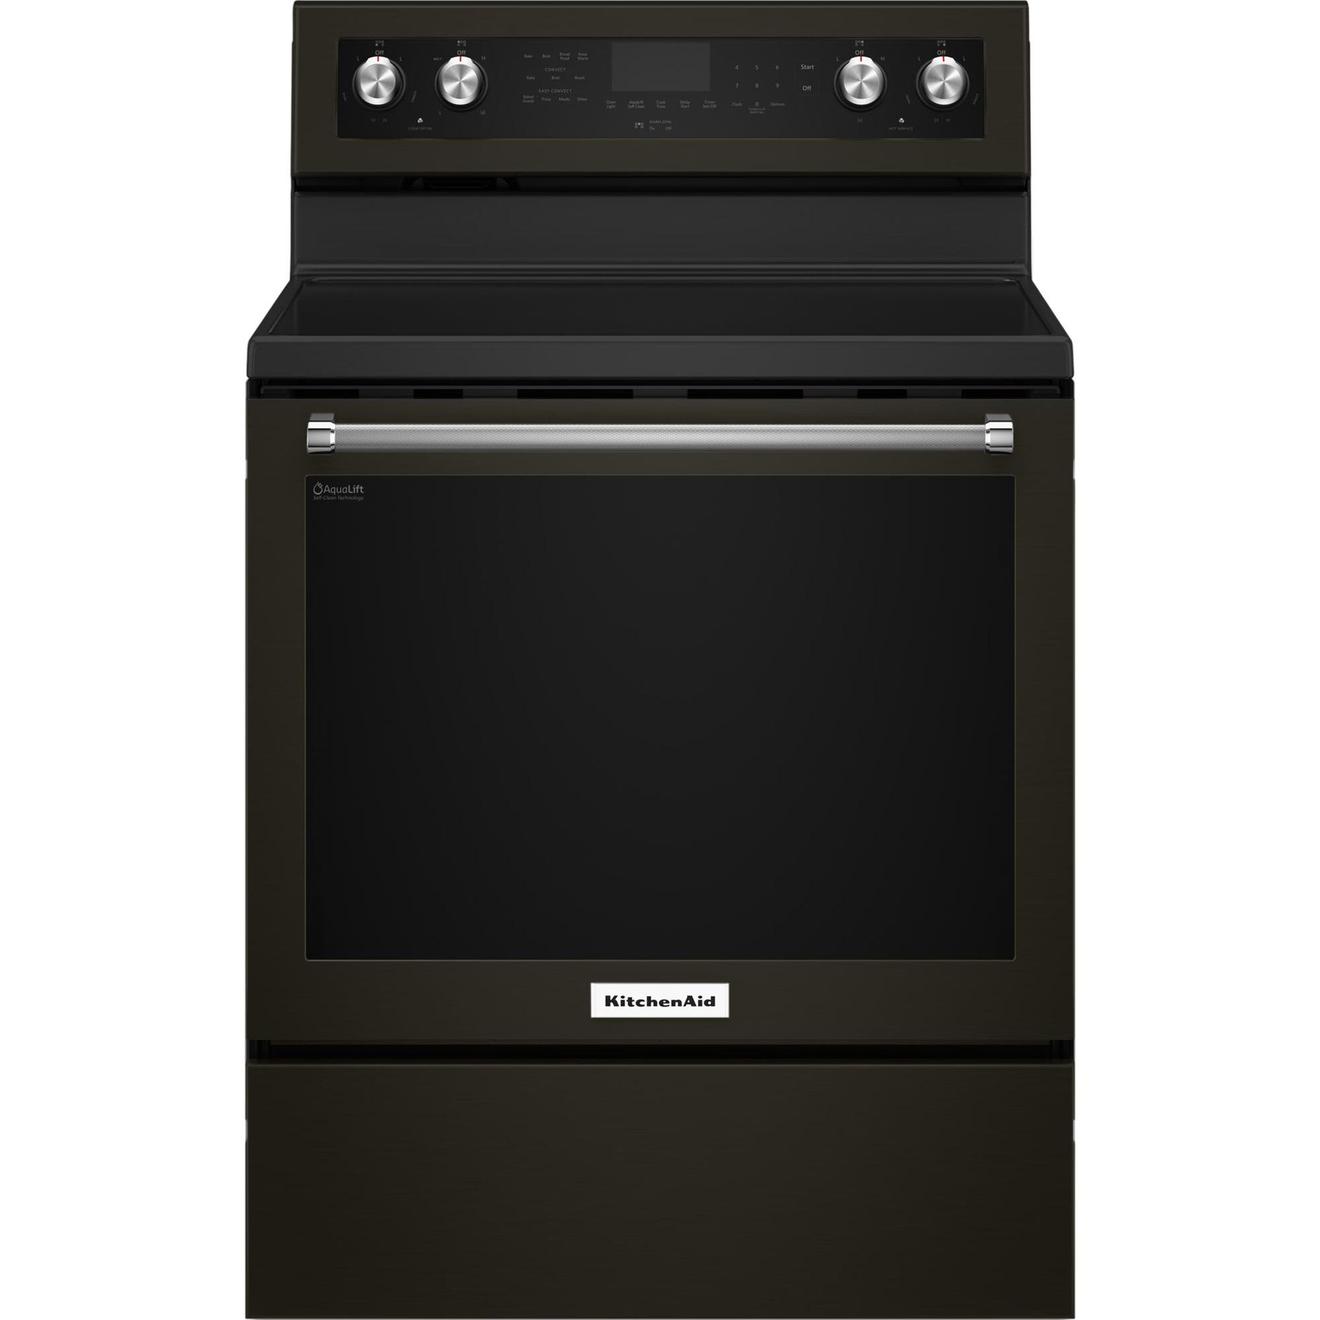 KitchenAid 30 inch Single Oven Electric Range offers at $1699.98 in Trail Appliances